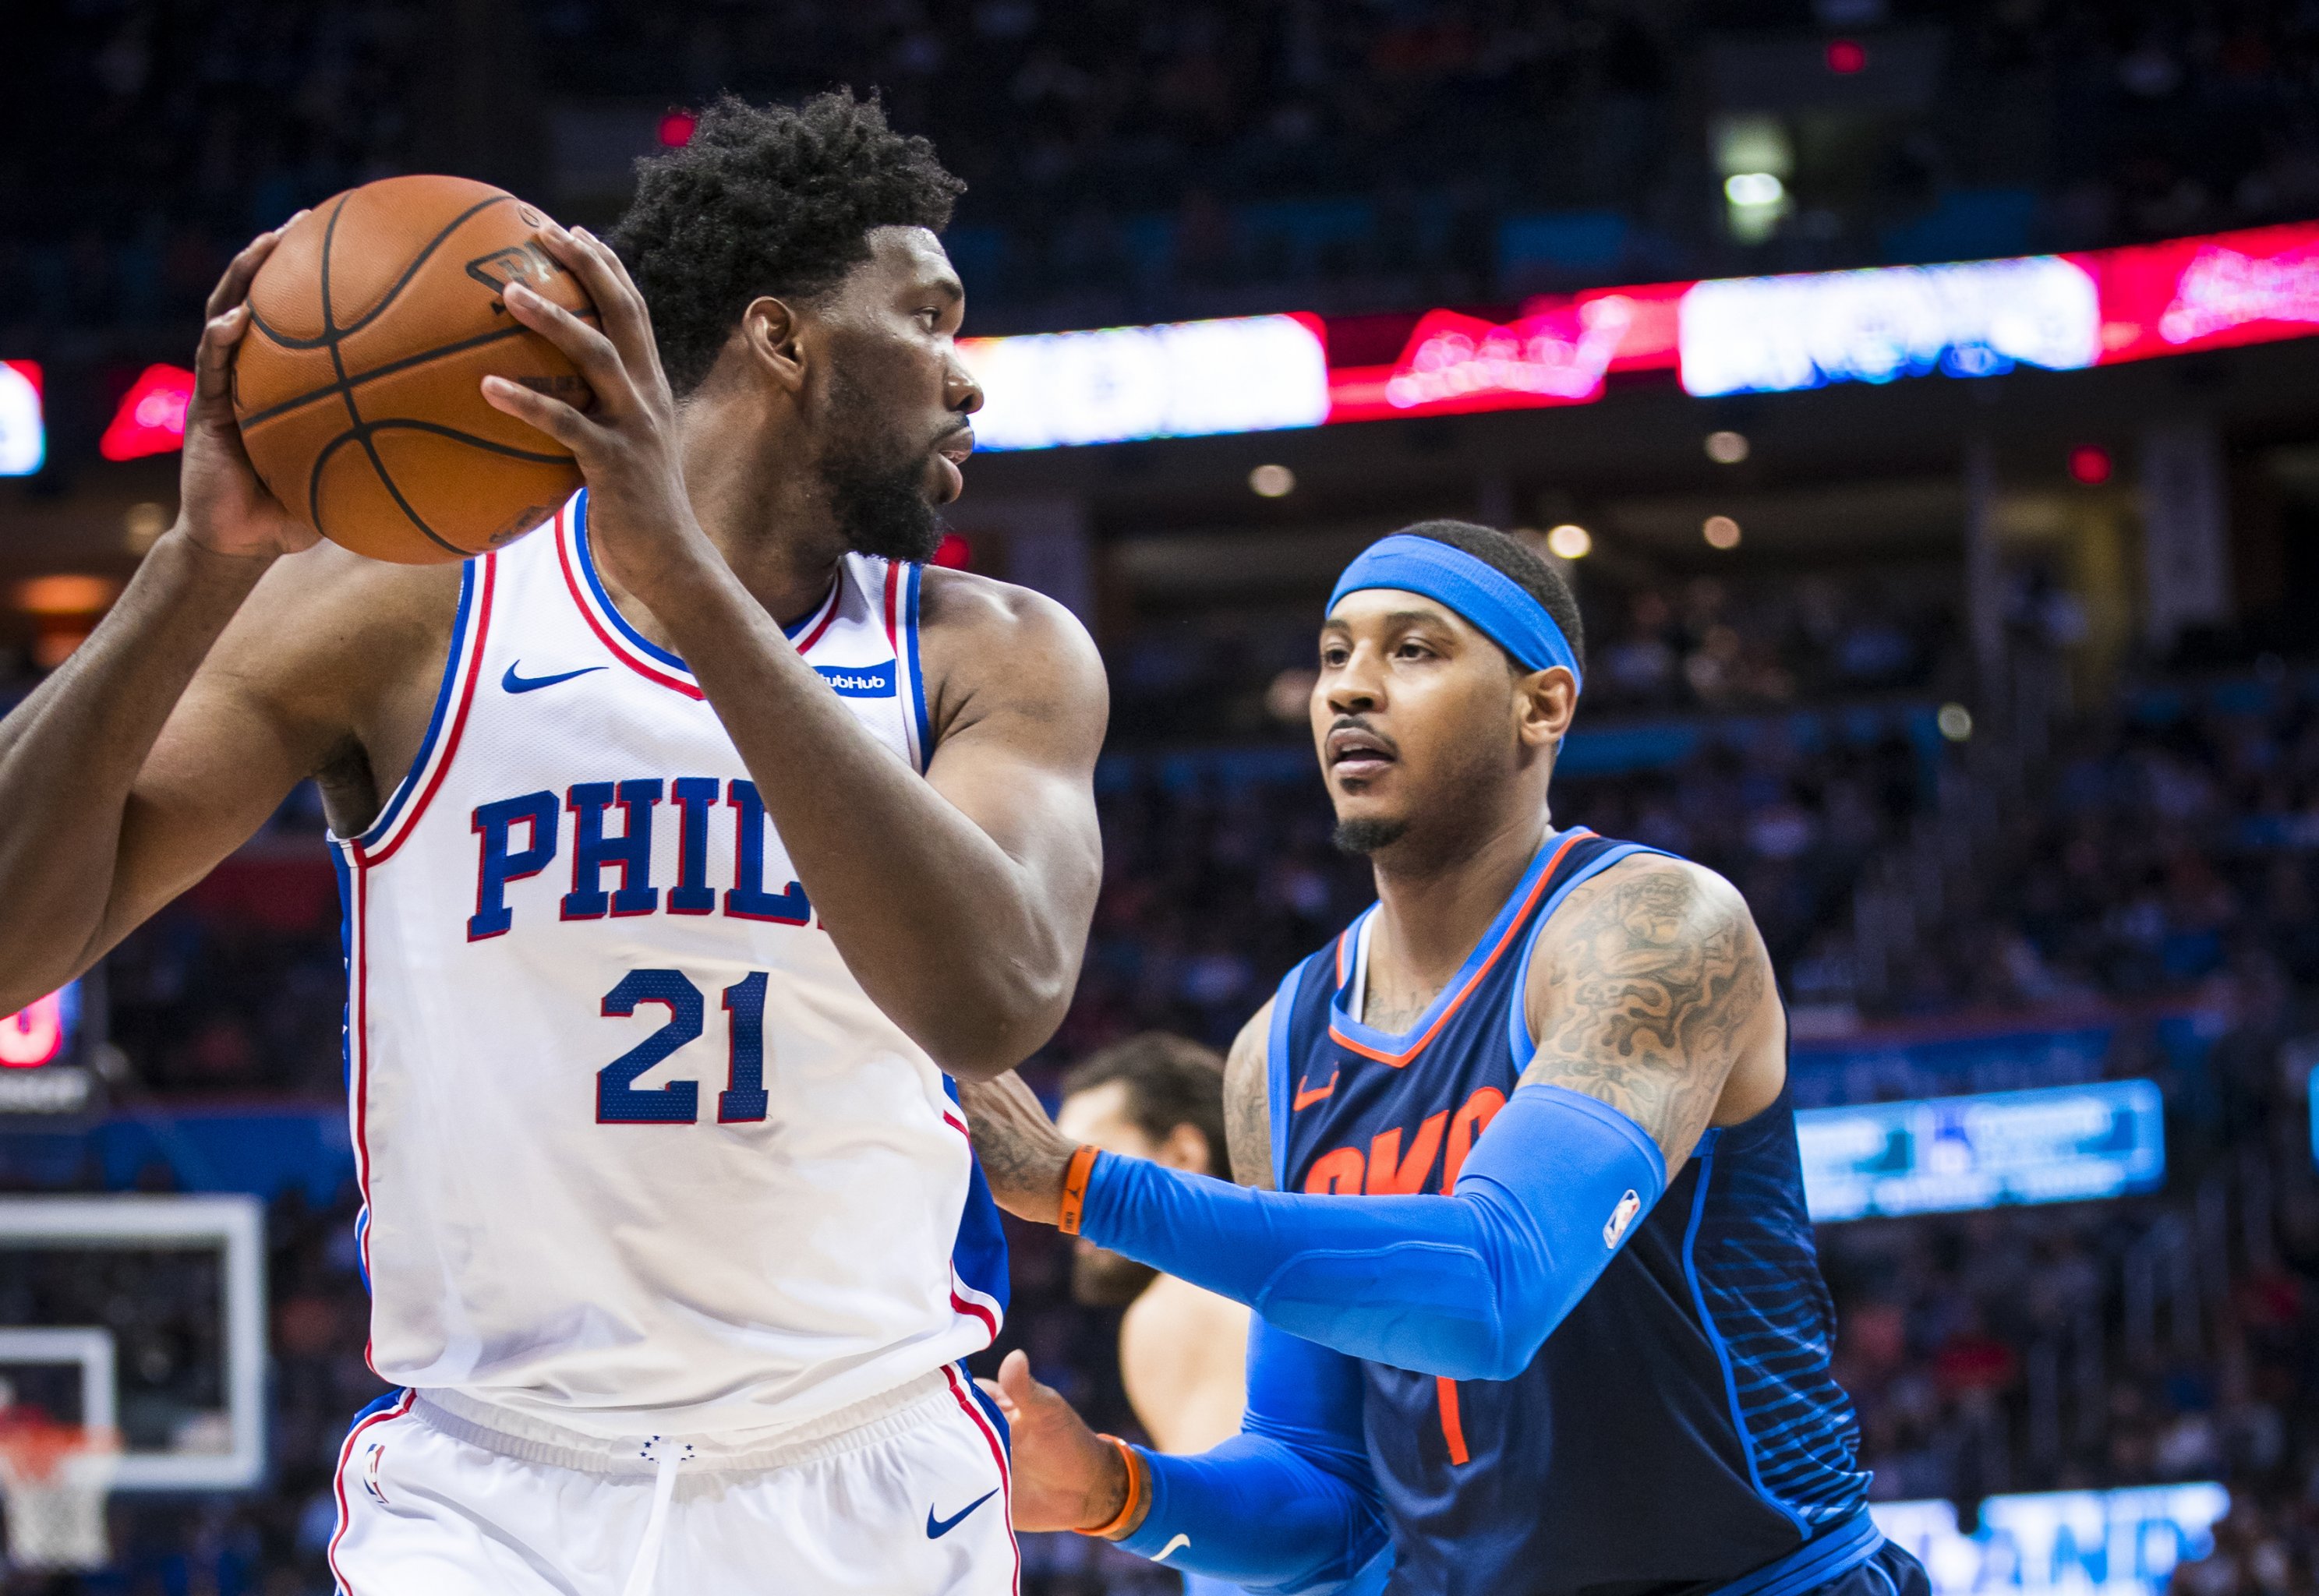 Report: Derrick Rose wants Bulls to sign Carmelo Anthony - NBC Sports